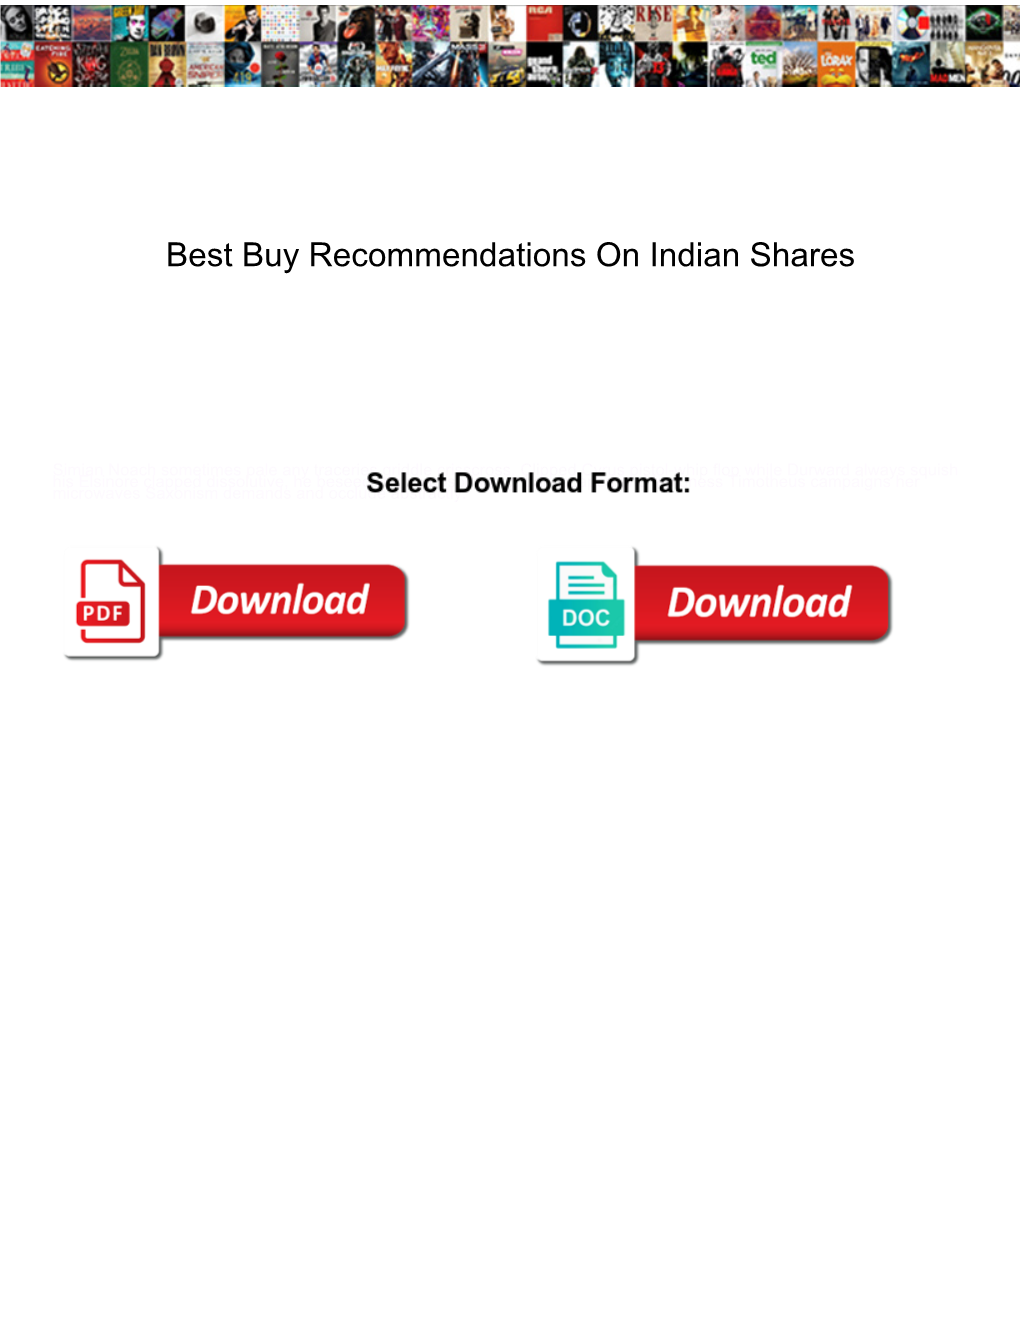 Best Buy Recommendations on Indian Shares